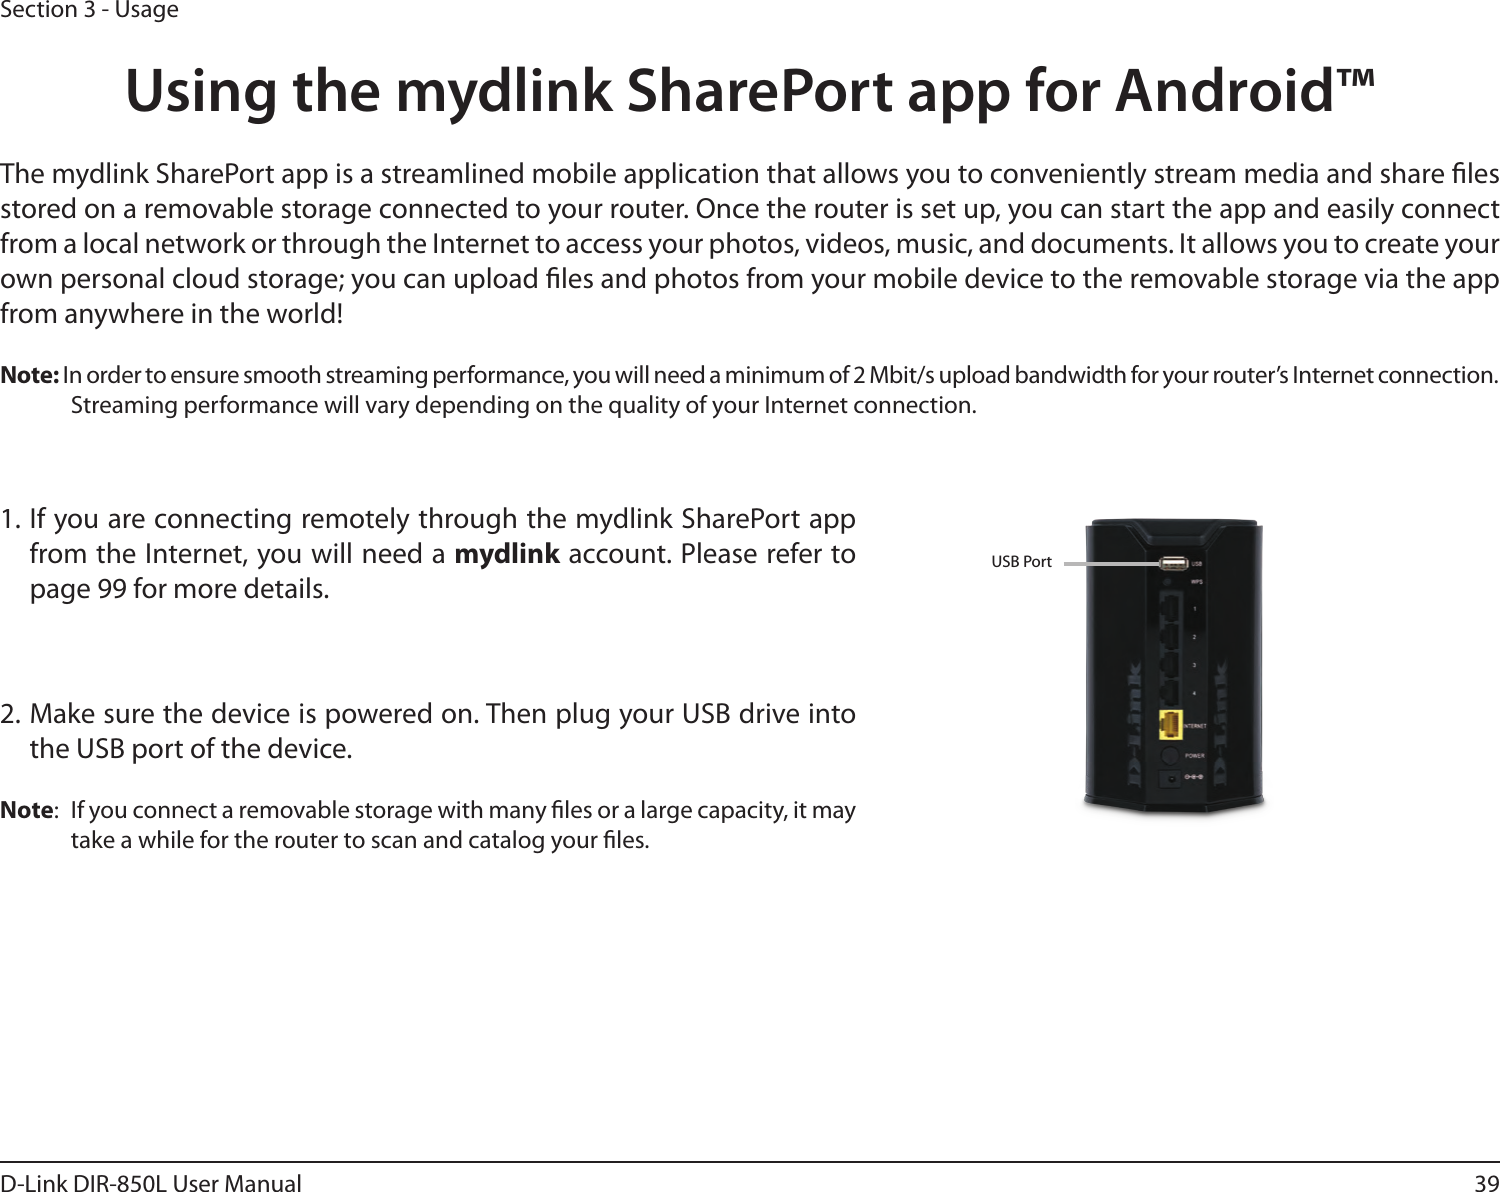 39D-Link DIR-850L User ManualSection 3 - UsageUsing the mydlink SharePort app for Android™The mydlink SharePort app is a streamlined mobile application that allows you to conveniently stream media and share les stored on a removable storage connected to your router. Once the router is set up, you can start the app and easily connect from a local network or through the Internet to access your photos, videos, music, and documents. It allows you to create your own personal cloud storage; you can upload les and photos from your mobile device to the removable storage via the app from anywhere in the world!Note: In order to ensure smooth streaming performance, you will need a minimum of 2 Mbit/s upload bandwidth for your router’s Internet connection. Streaming performance will vary depending on the quality of your Internet connection.1. If you are connecting remotely through the mydlink SharePort app from the Internet, you will need a mydlink account. Please refer to  page 99 for more details.2. Make sure the device is powered on. Then plug your USB drive into the USB port of the device.Note:  If you connect a removable storage with many les or a large capacity, it may take a while for the router to scan and catalog your les.USB Port